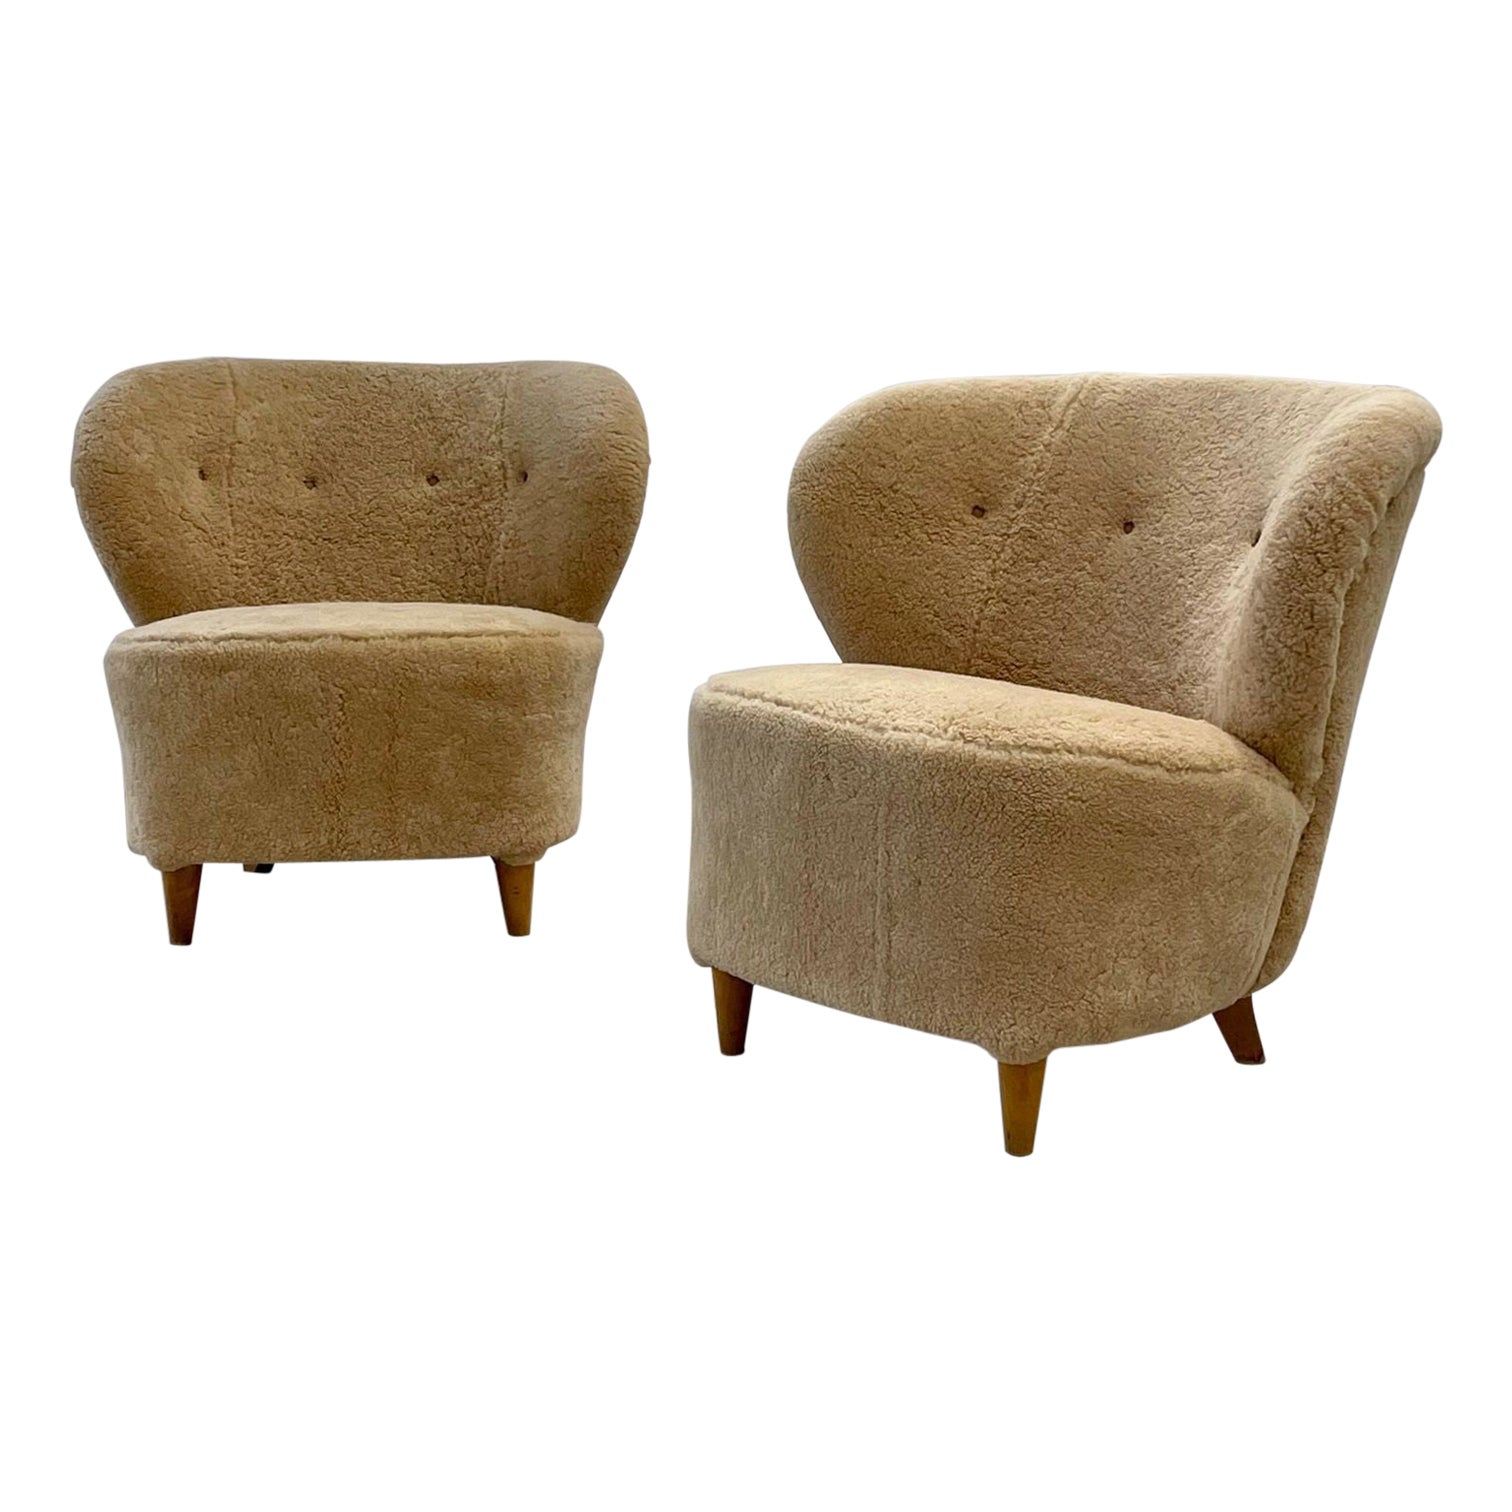 Pair of Mid-Century Modern Swedish Lounge/Slipper Chairs, Sven Staaf, 1950s